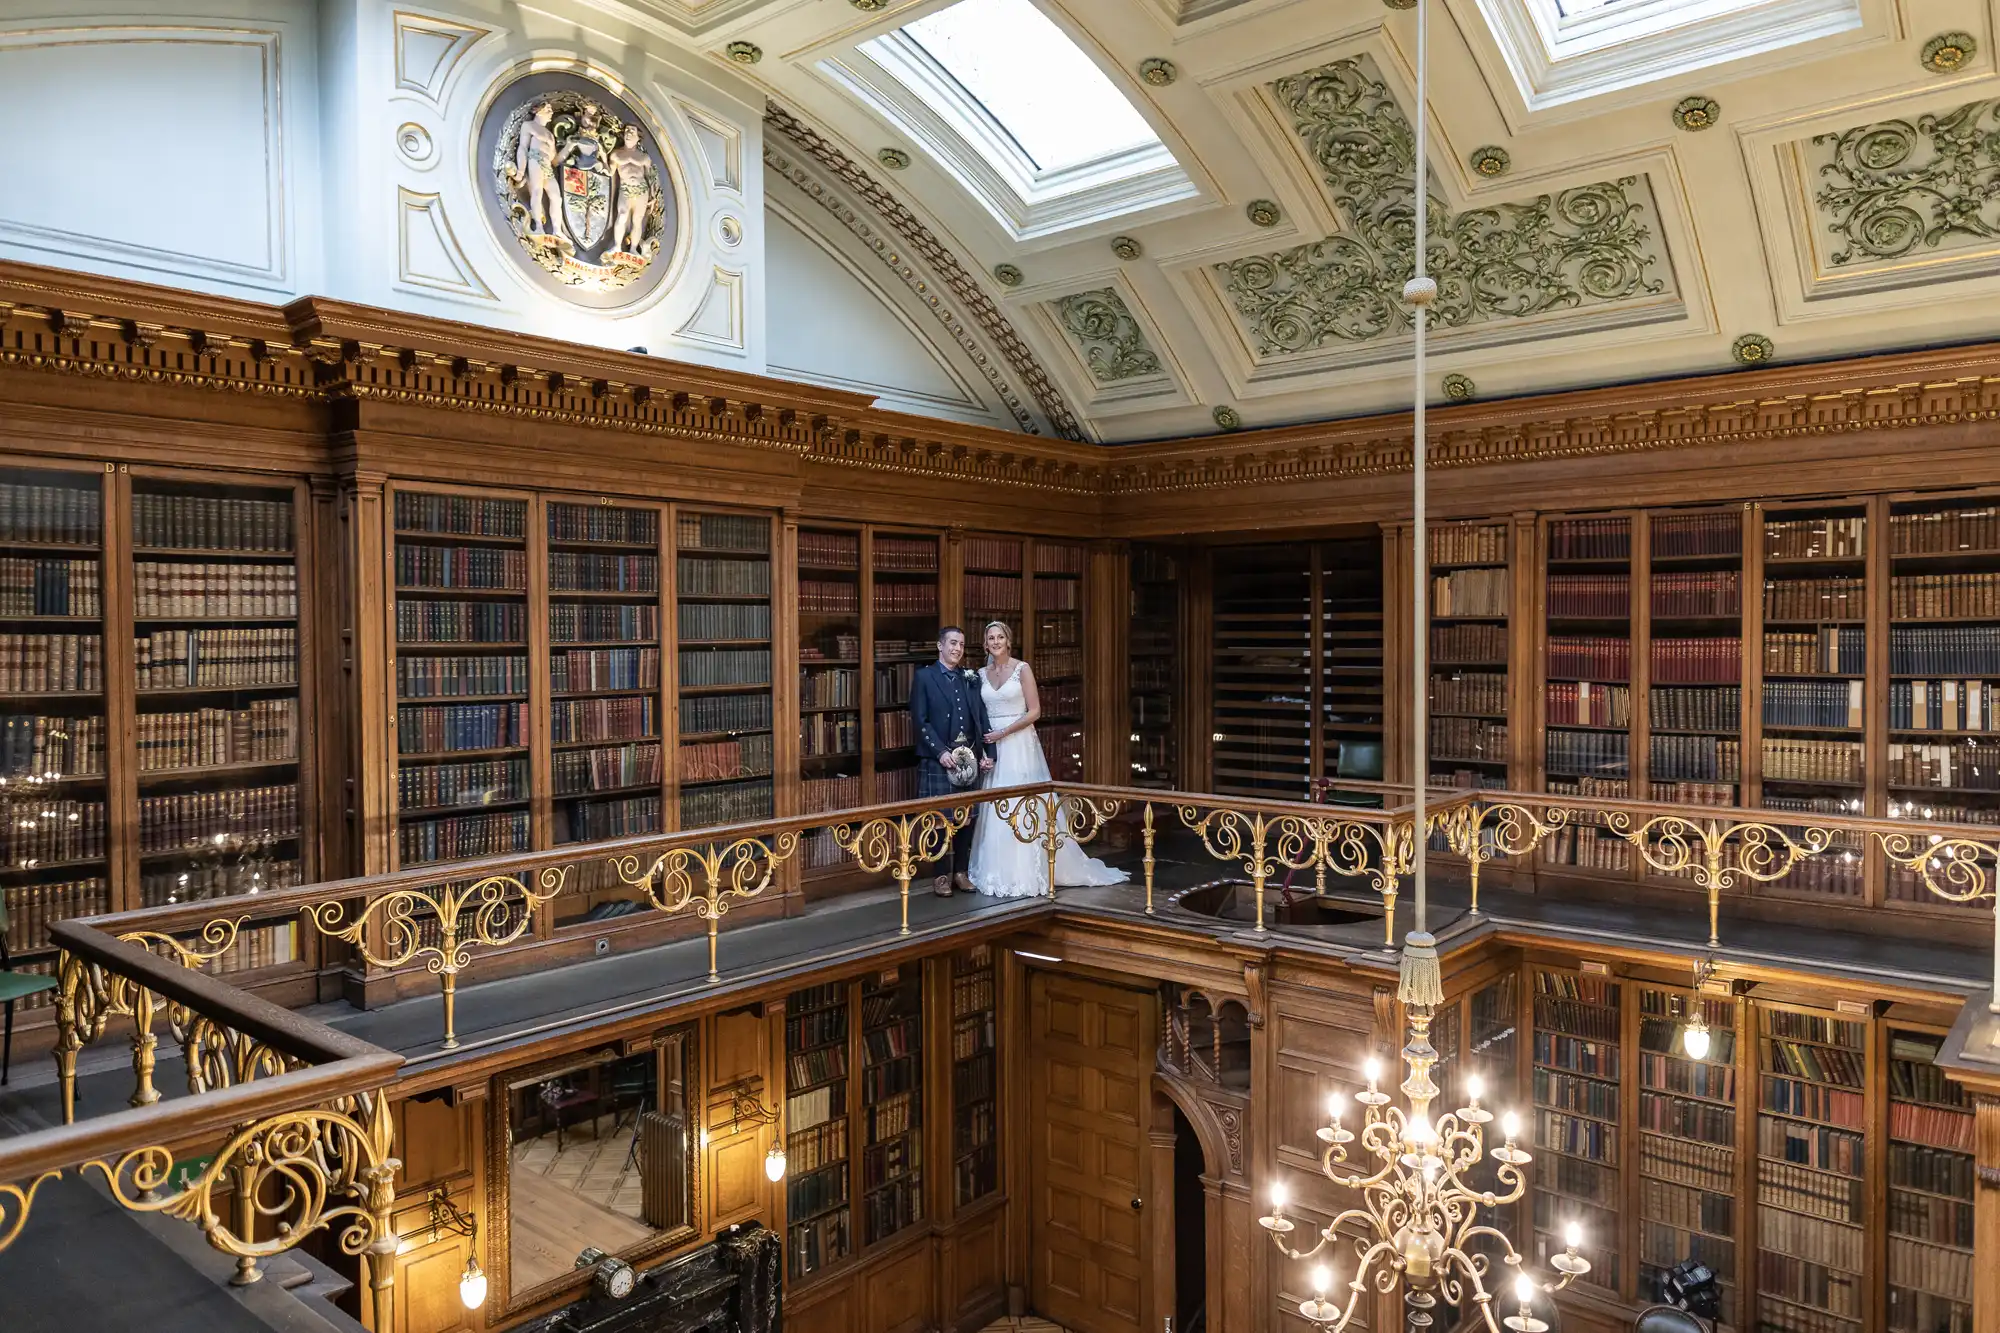 A couple stands on a balcony inside a grand, wood-paneled library with tall bookshelves and ornate ceiling details.